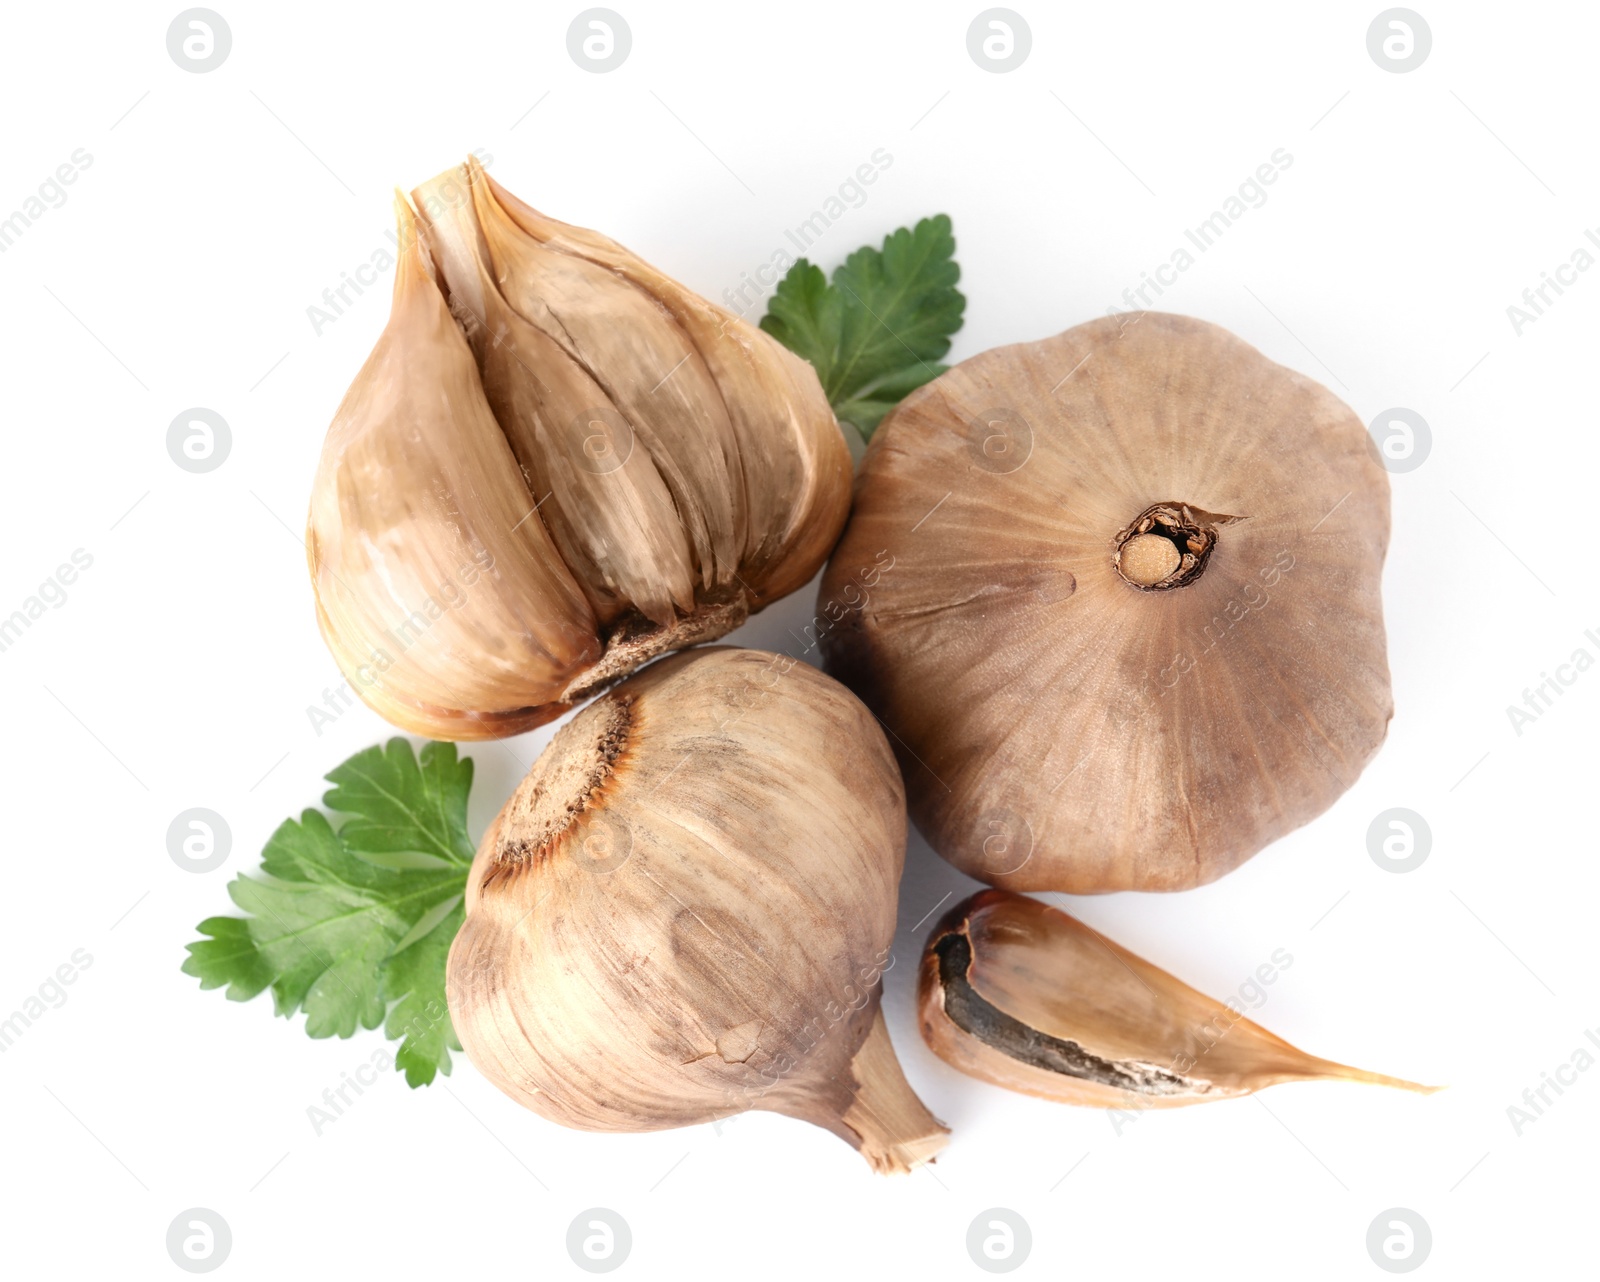 Photo of Aged black garlic with parsley on white background, view from above